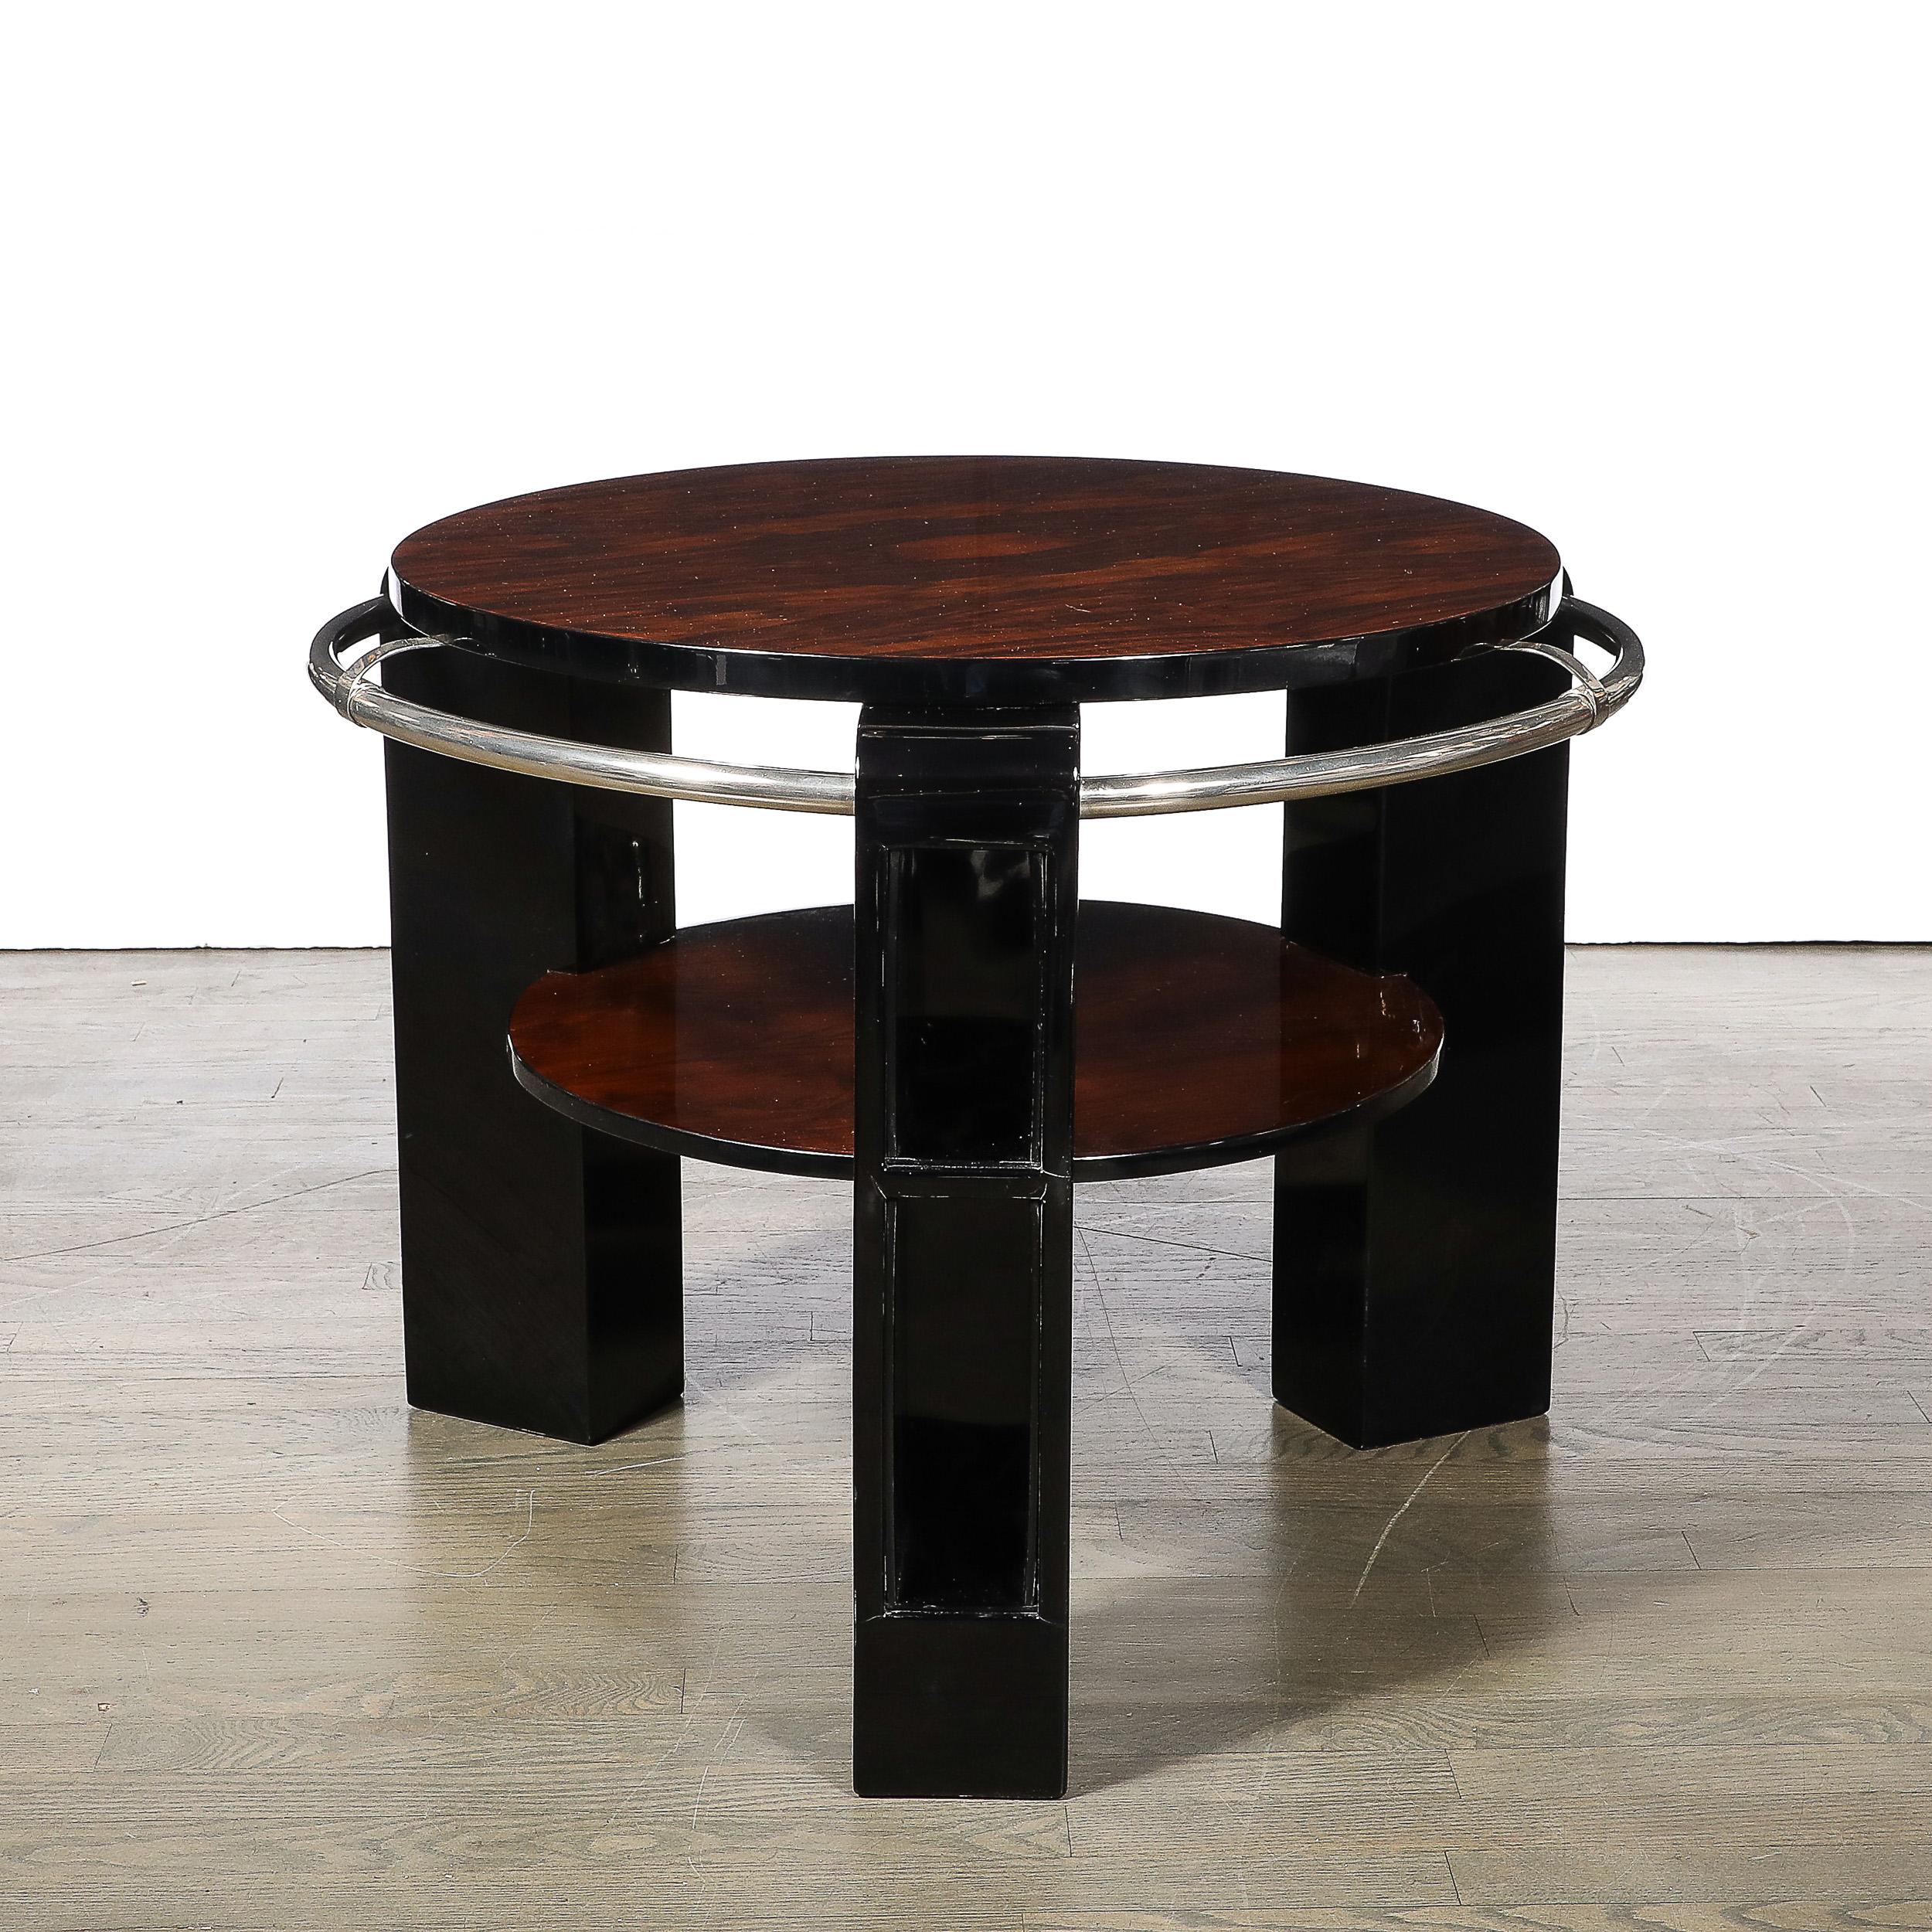 French Art Deco Two-Tier Book-Matched Walnut & Black Lacquer Occasional Table w/ Chrome For Sale